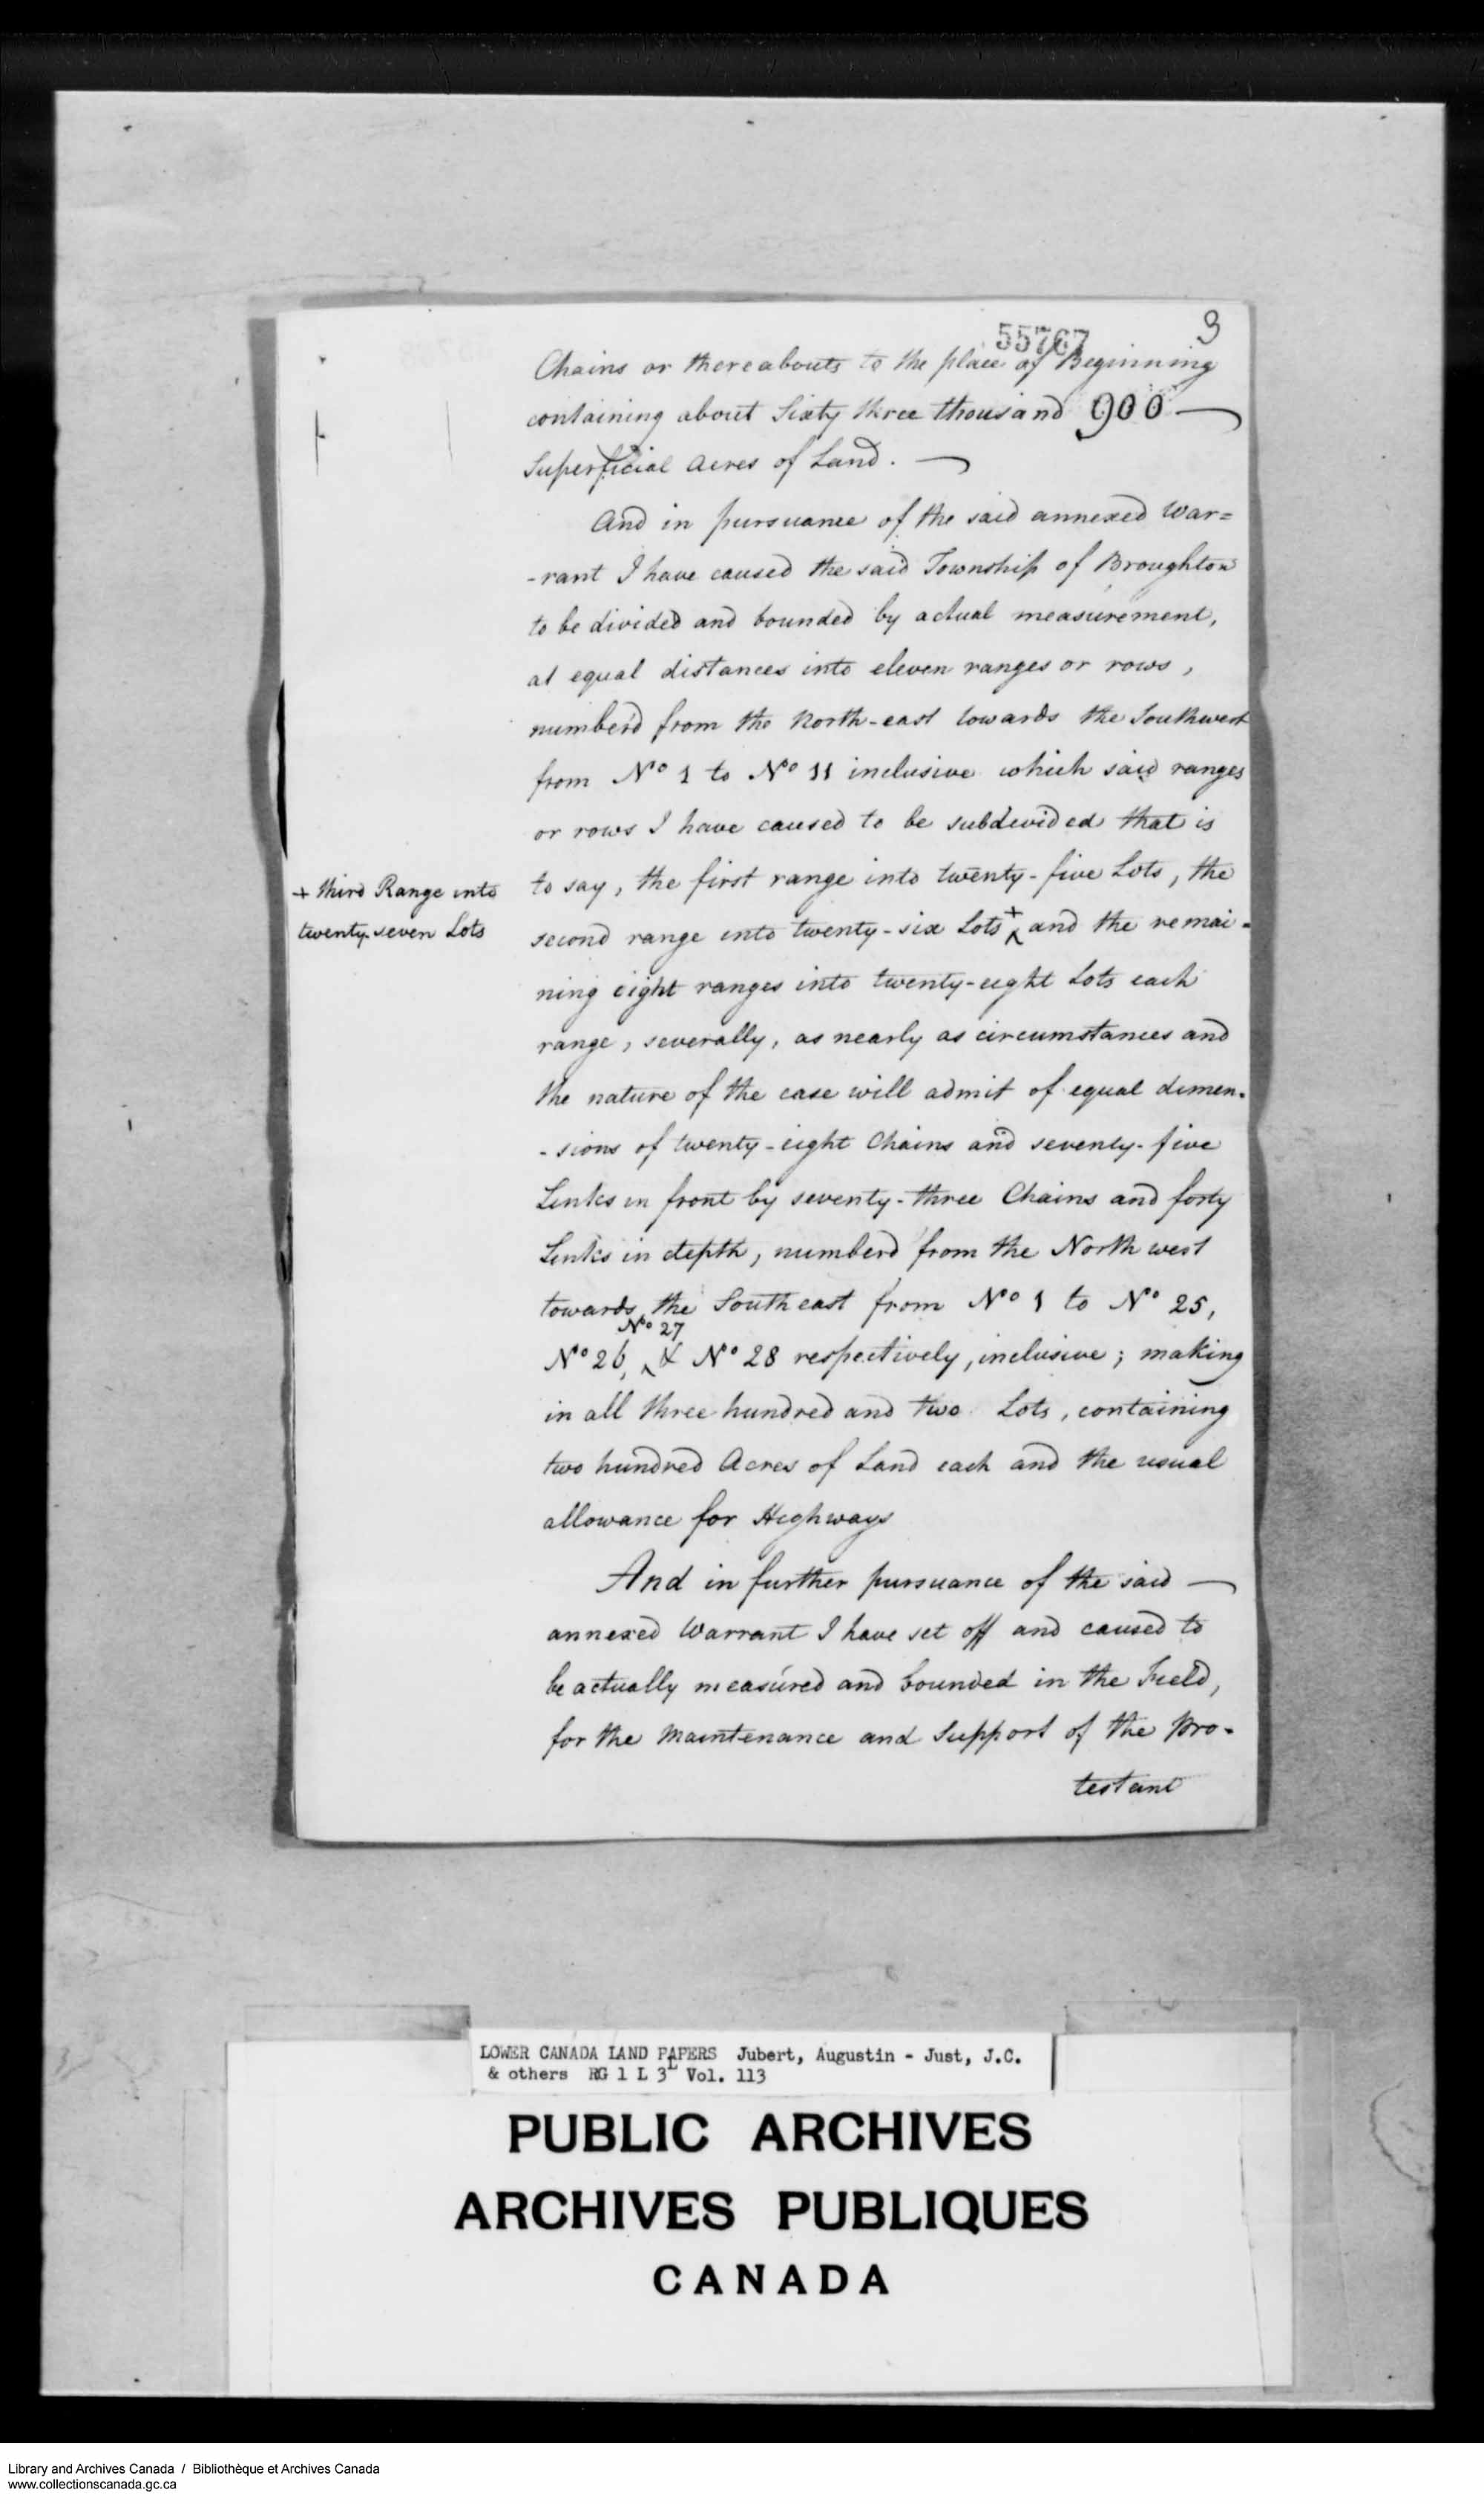 Digitized page of  for Image No.: e008700255